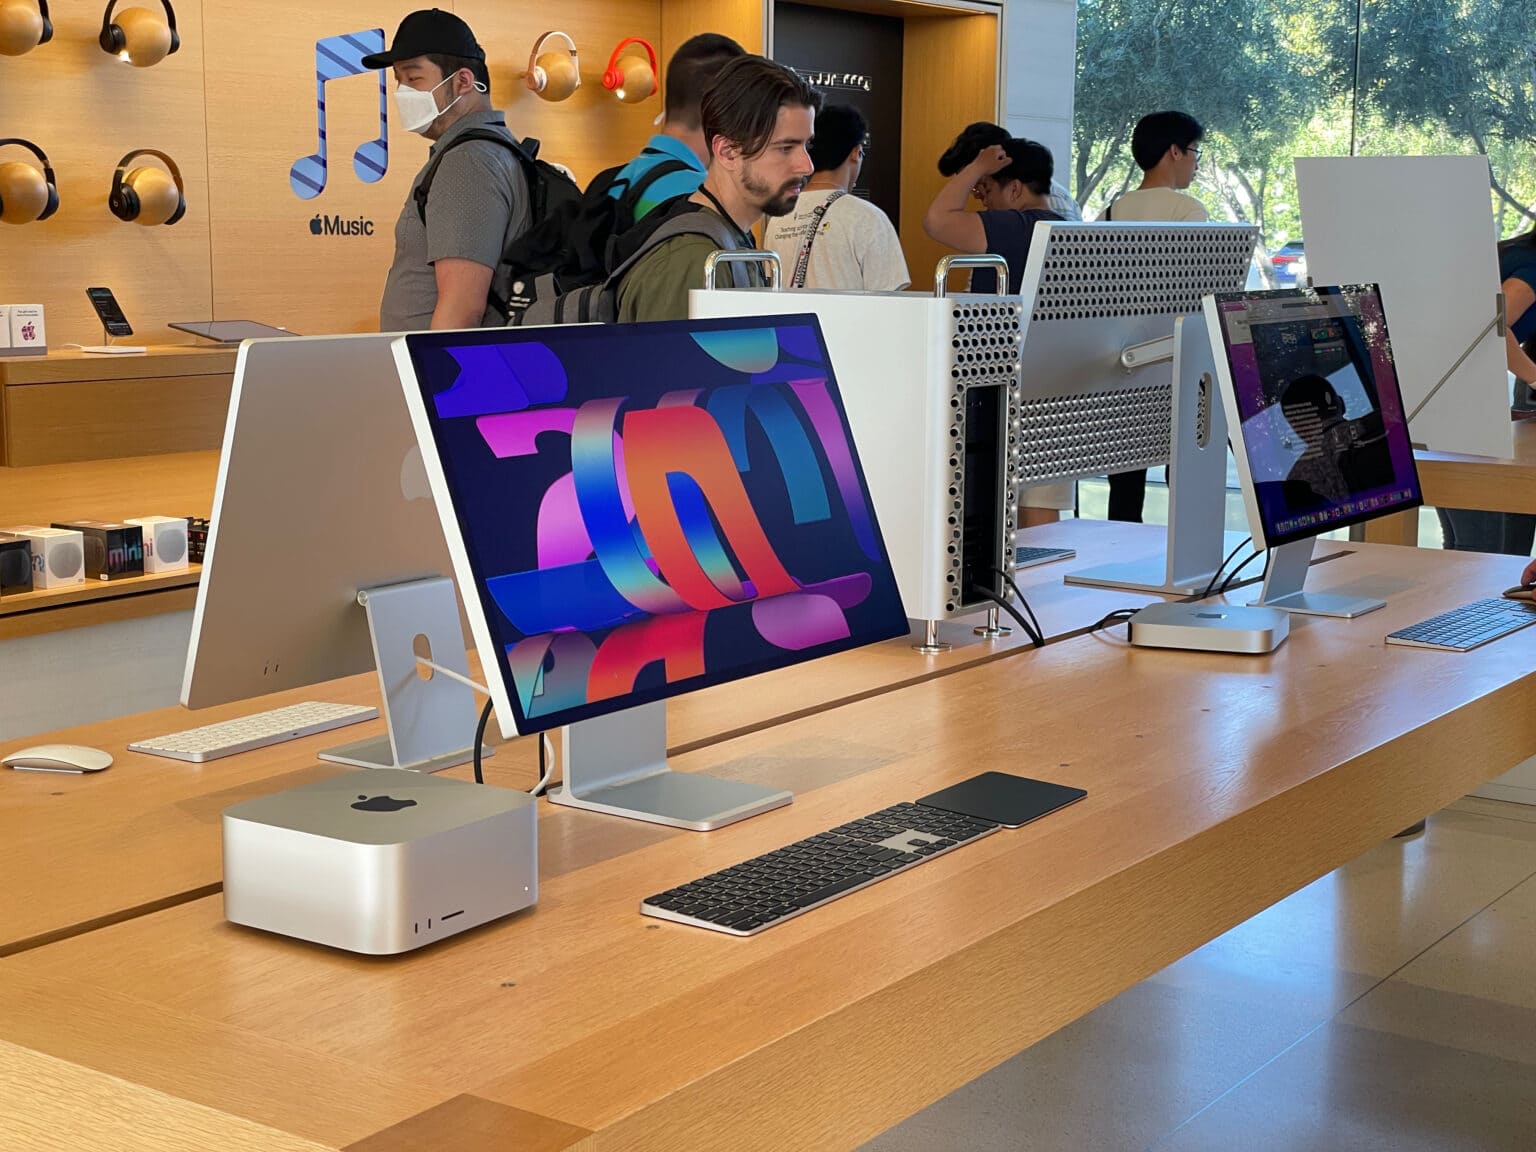 A table of desktop Macs. Going clockwise around the table, starting at the front: the Mac Studio with Studio Display (height-adjustable stand and nano texture glass), the iMac, Mac Pro with Pro Display XDR (with Pro Stand) and Mac mini with Studio Display (tilt stand).